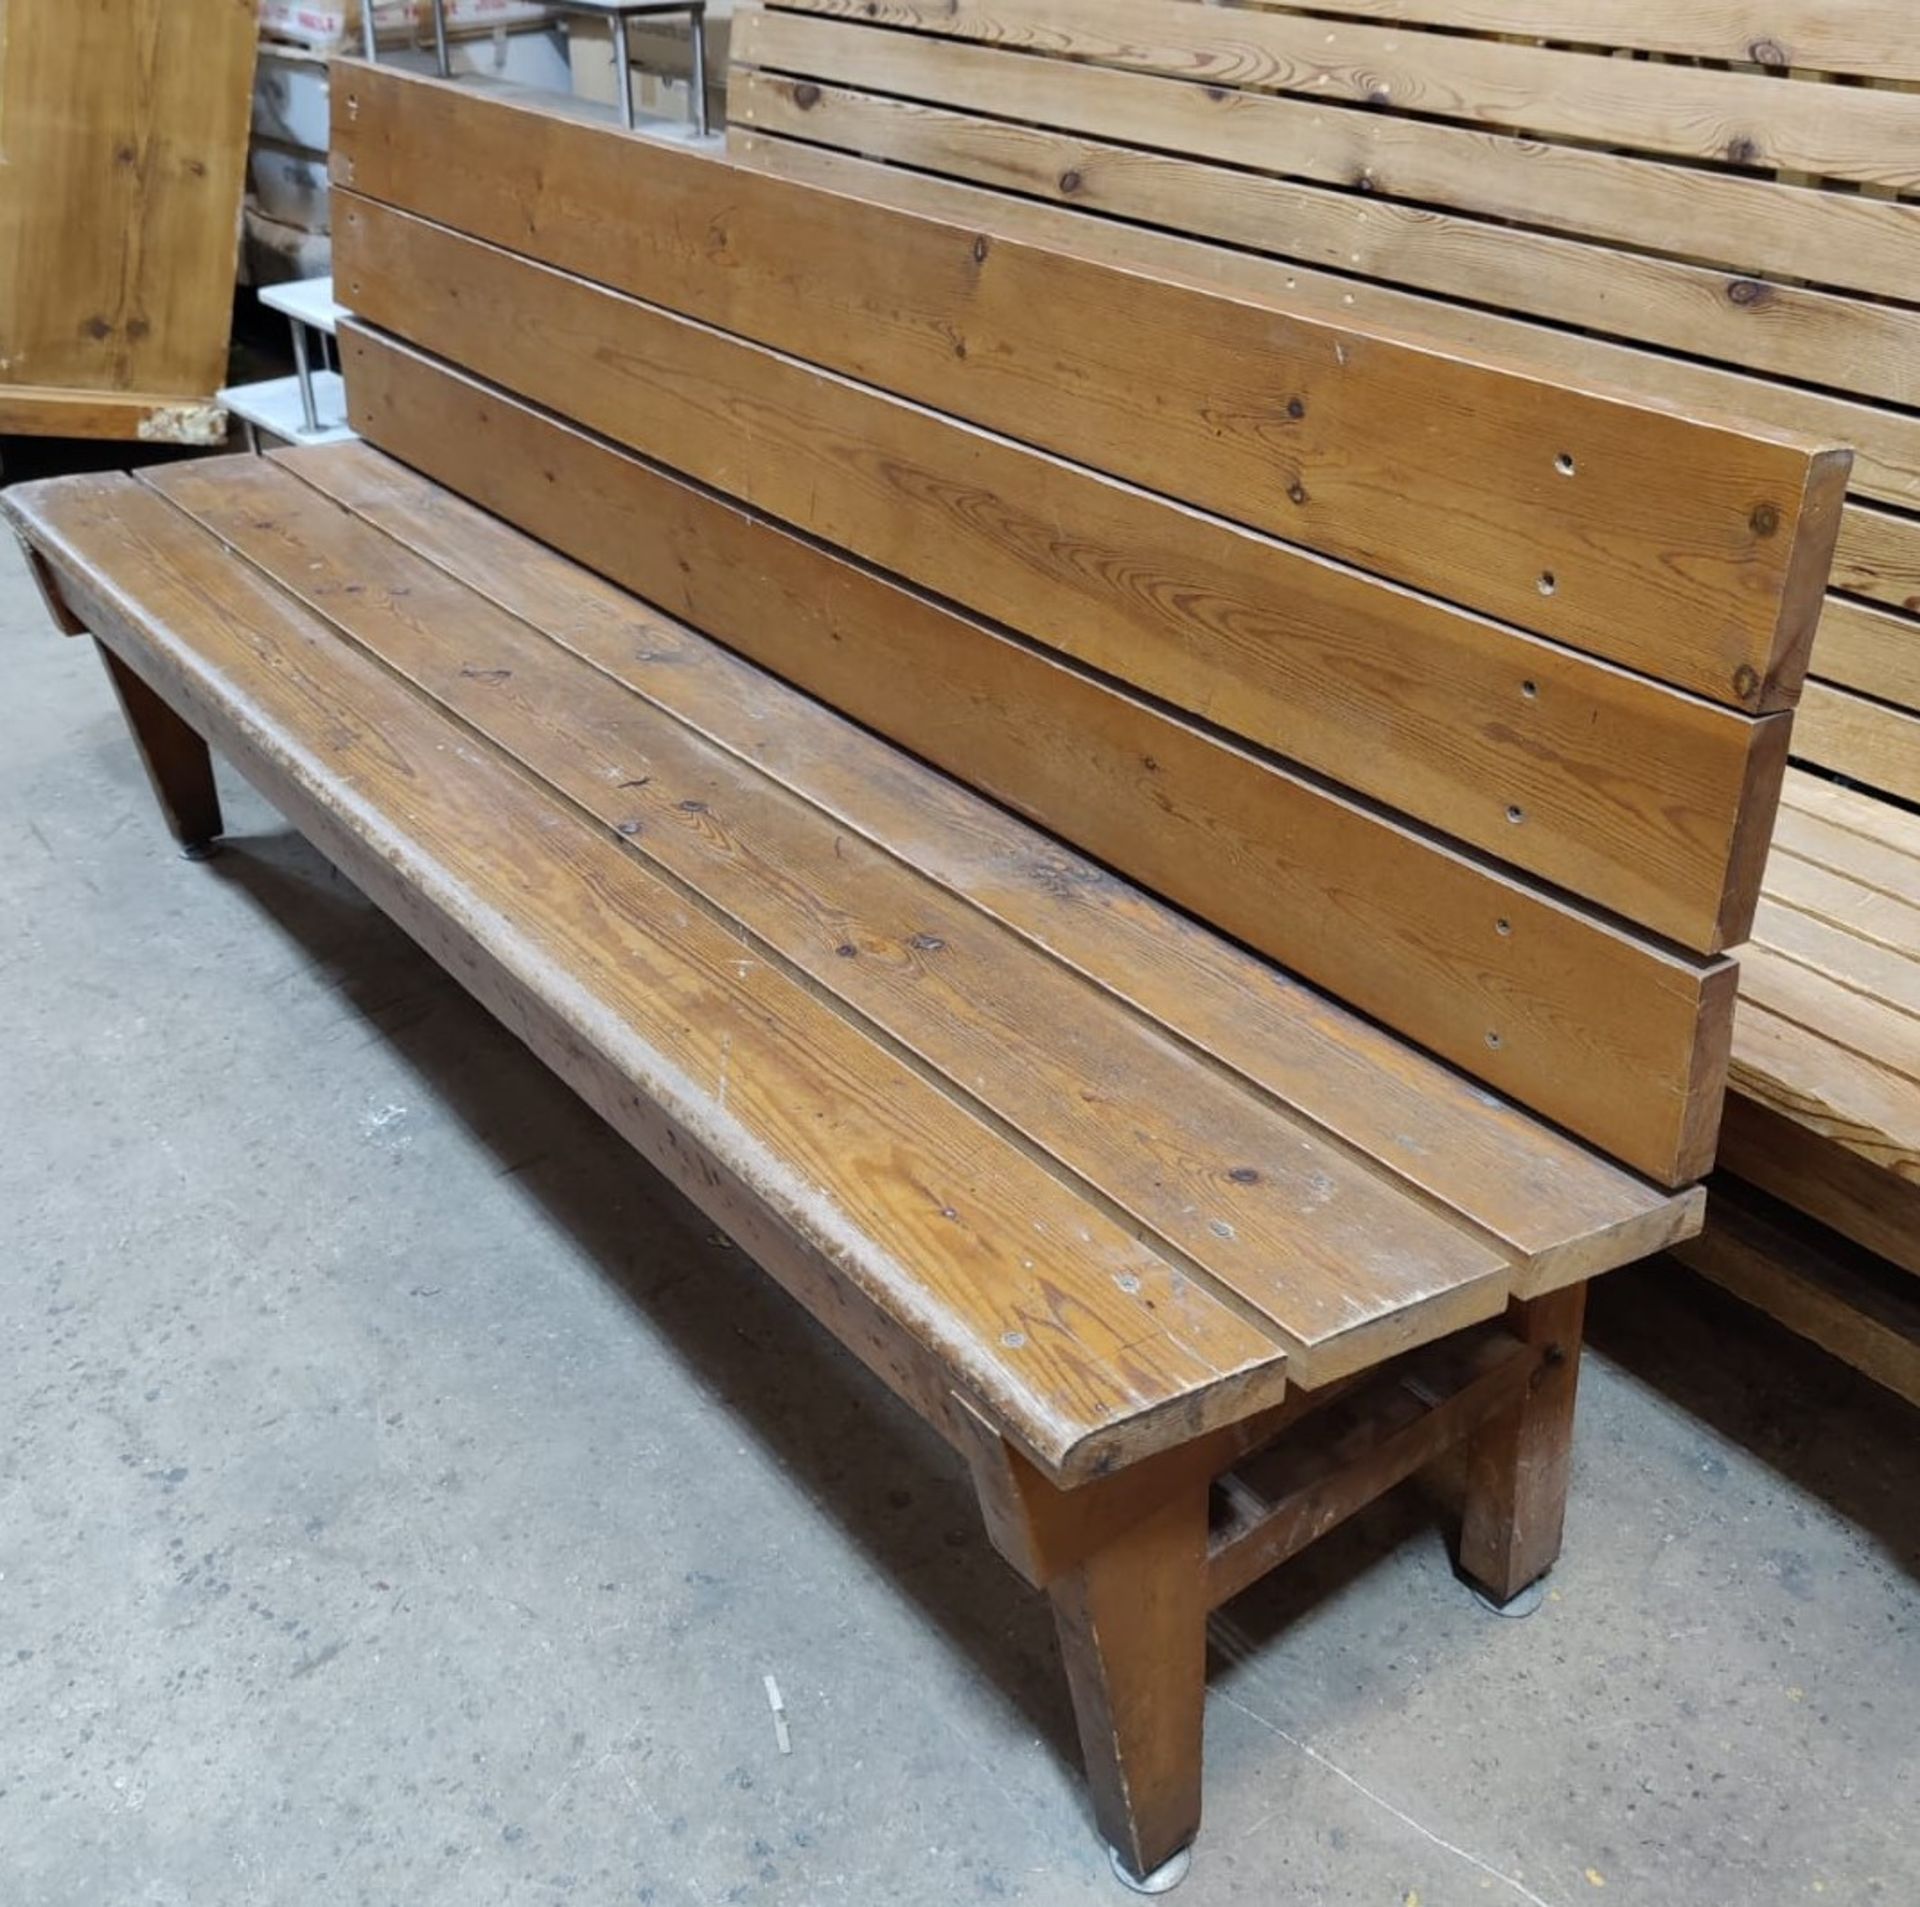 1 x Rustic Restaurant Seating Bench - Recently Removed From a Restaurant Environment - Image 5 of 6